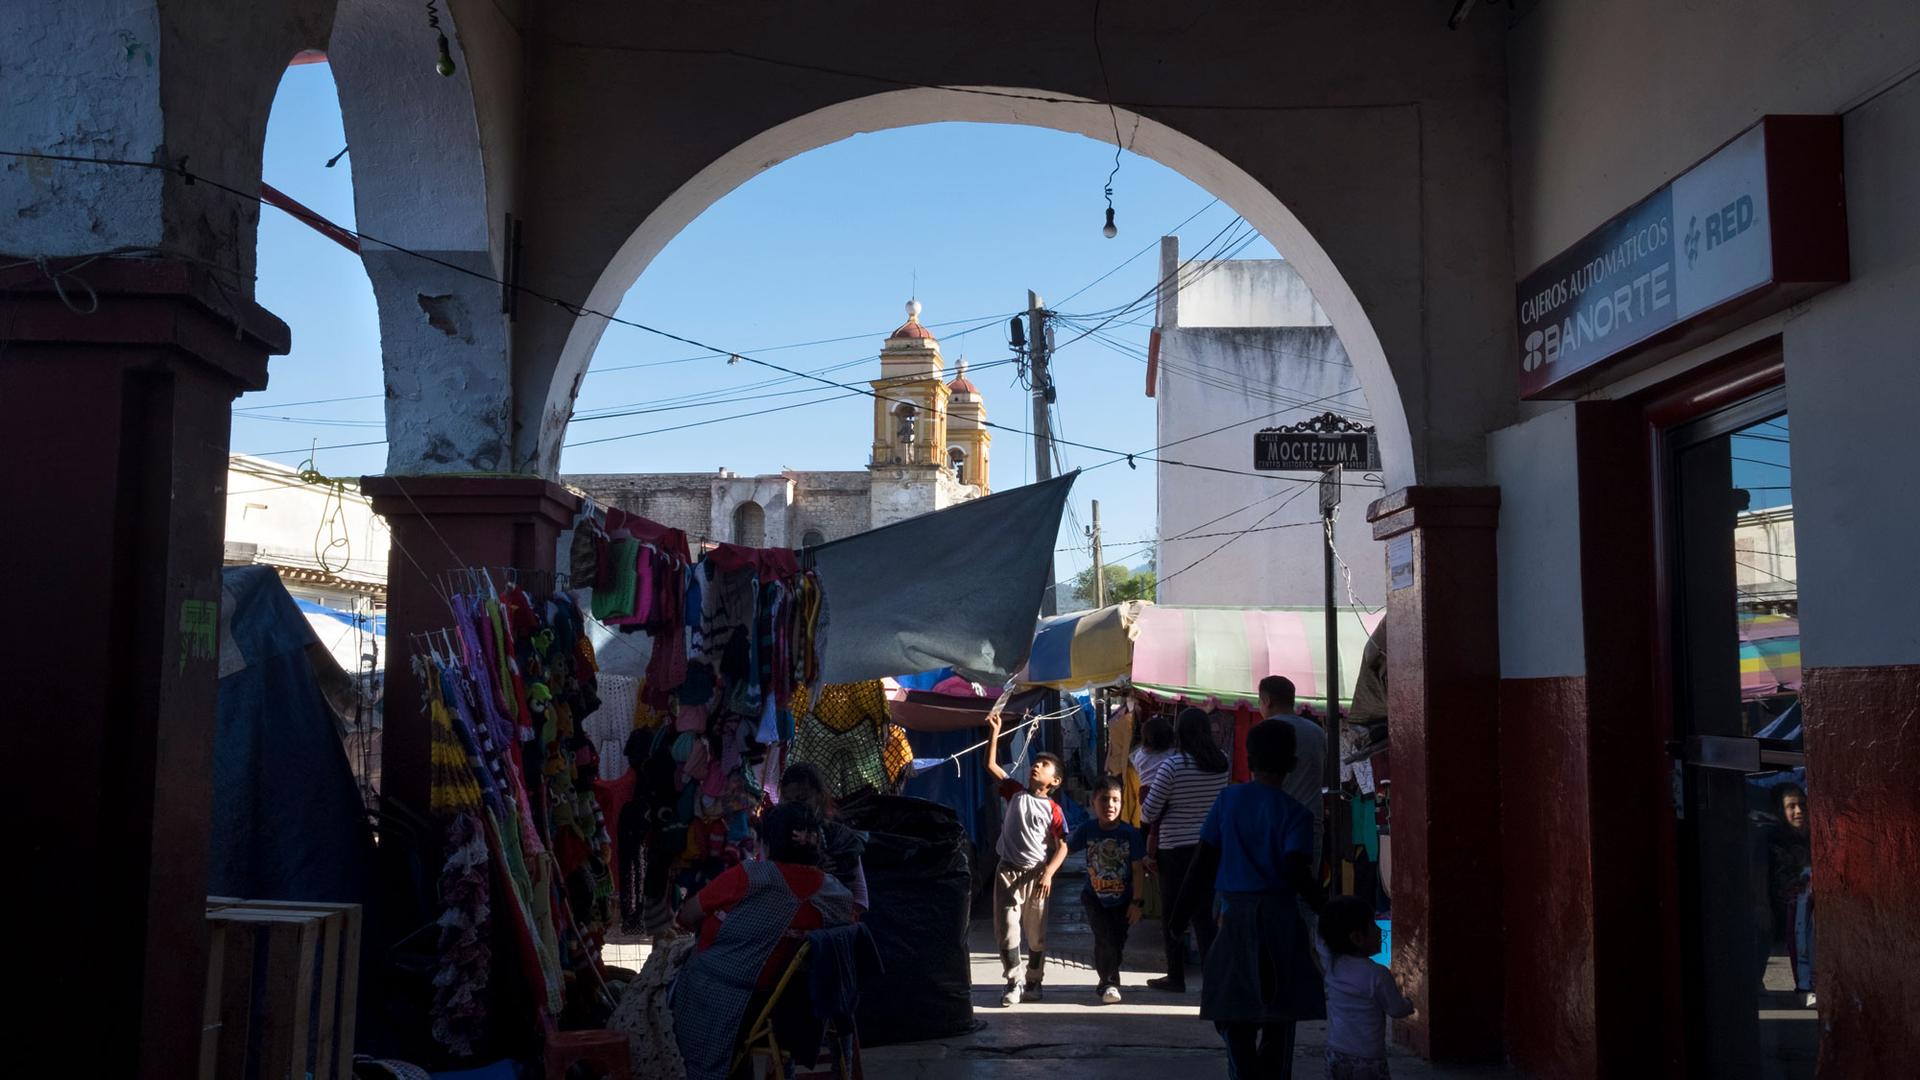 People are shown walking around at Tlaxiaco’s market, with the steeples of the Santa Maria de la Asunción church in the distance.